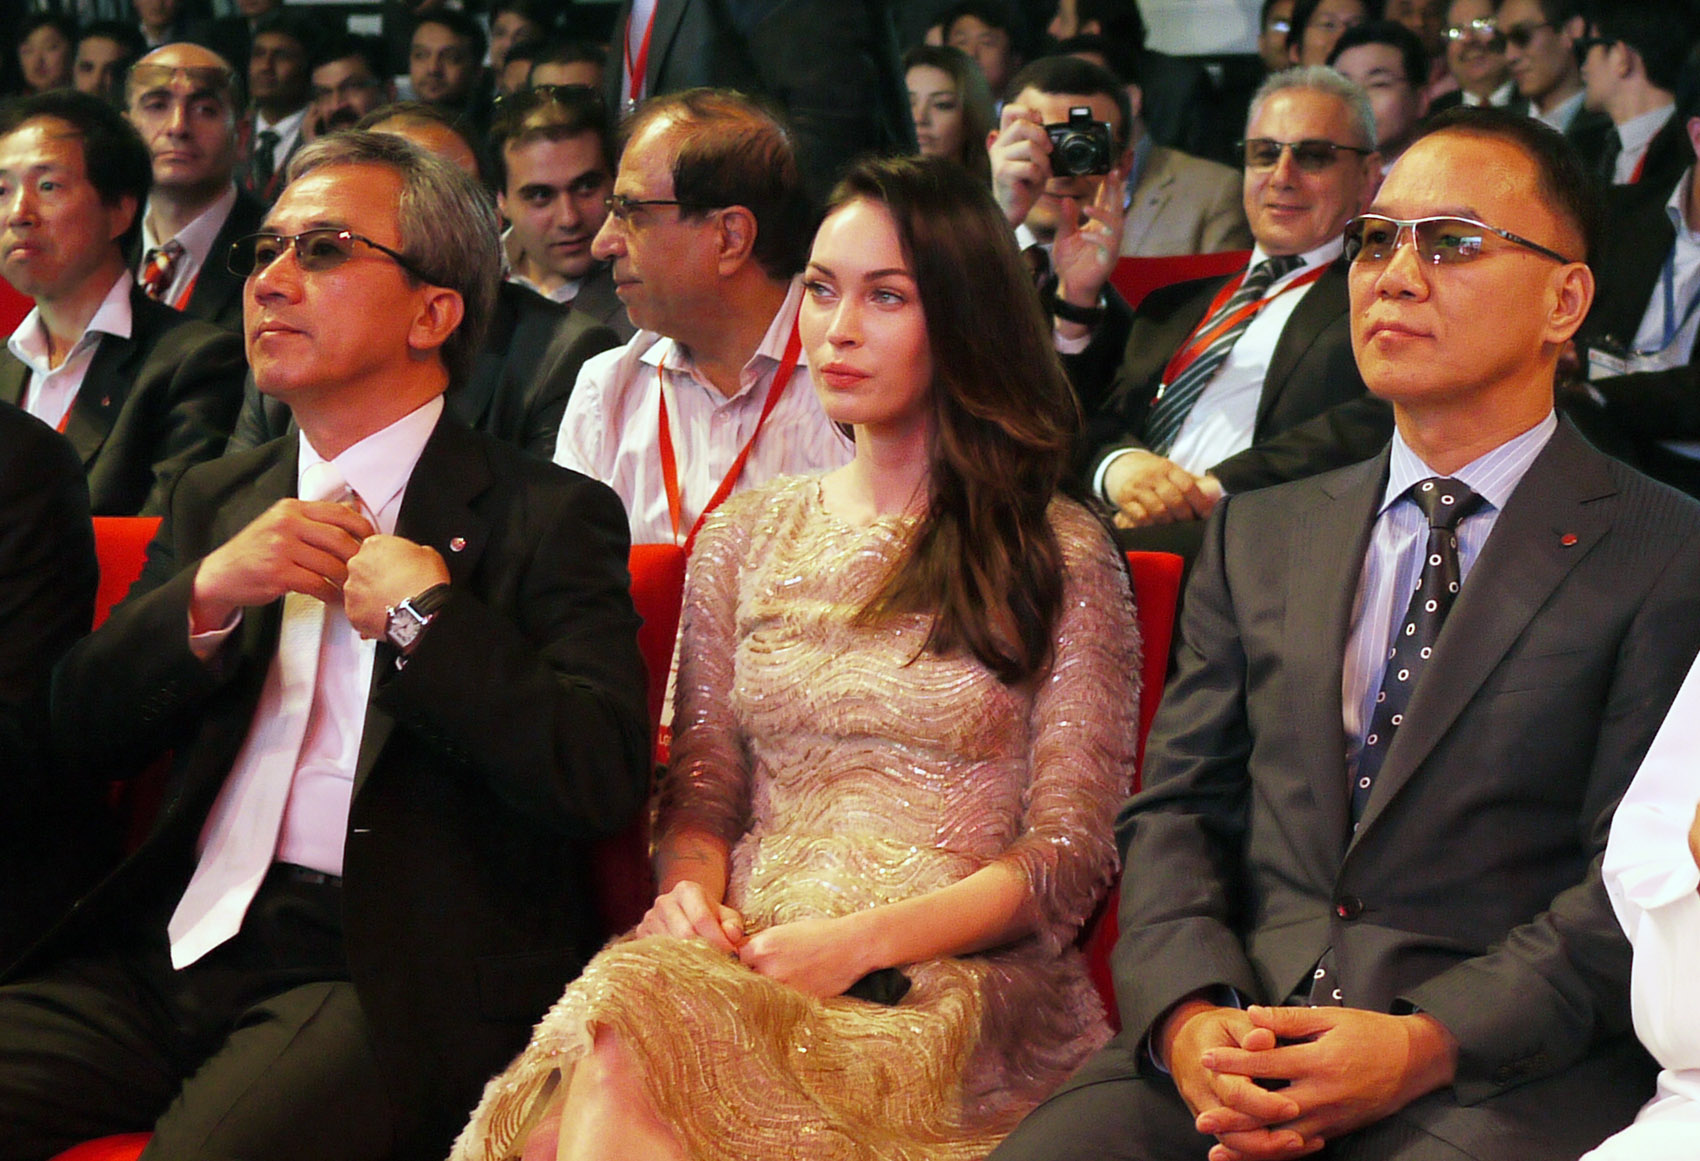 Kyung-hoon Byun, executive vice president of LG Electronics Home Entertainment Company, Megan Fox and K.W. Kim, president of LG Electronics, Middle East and Africa, sit together at Ferrari World in Abu Dhabi